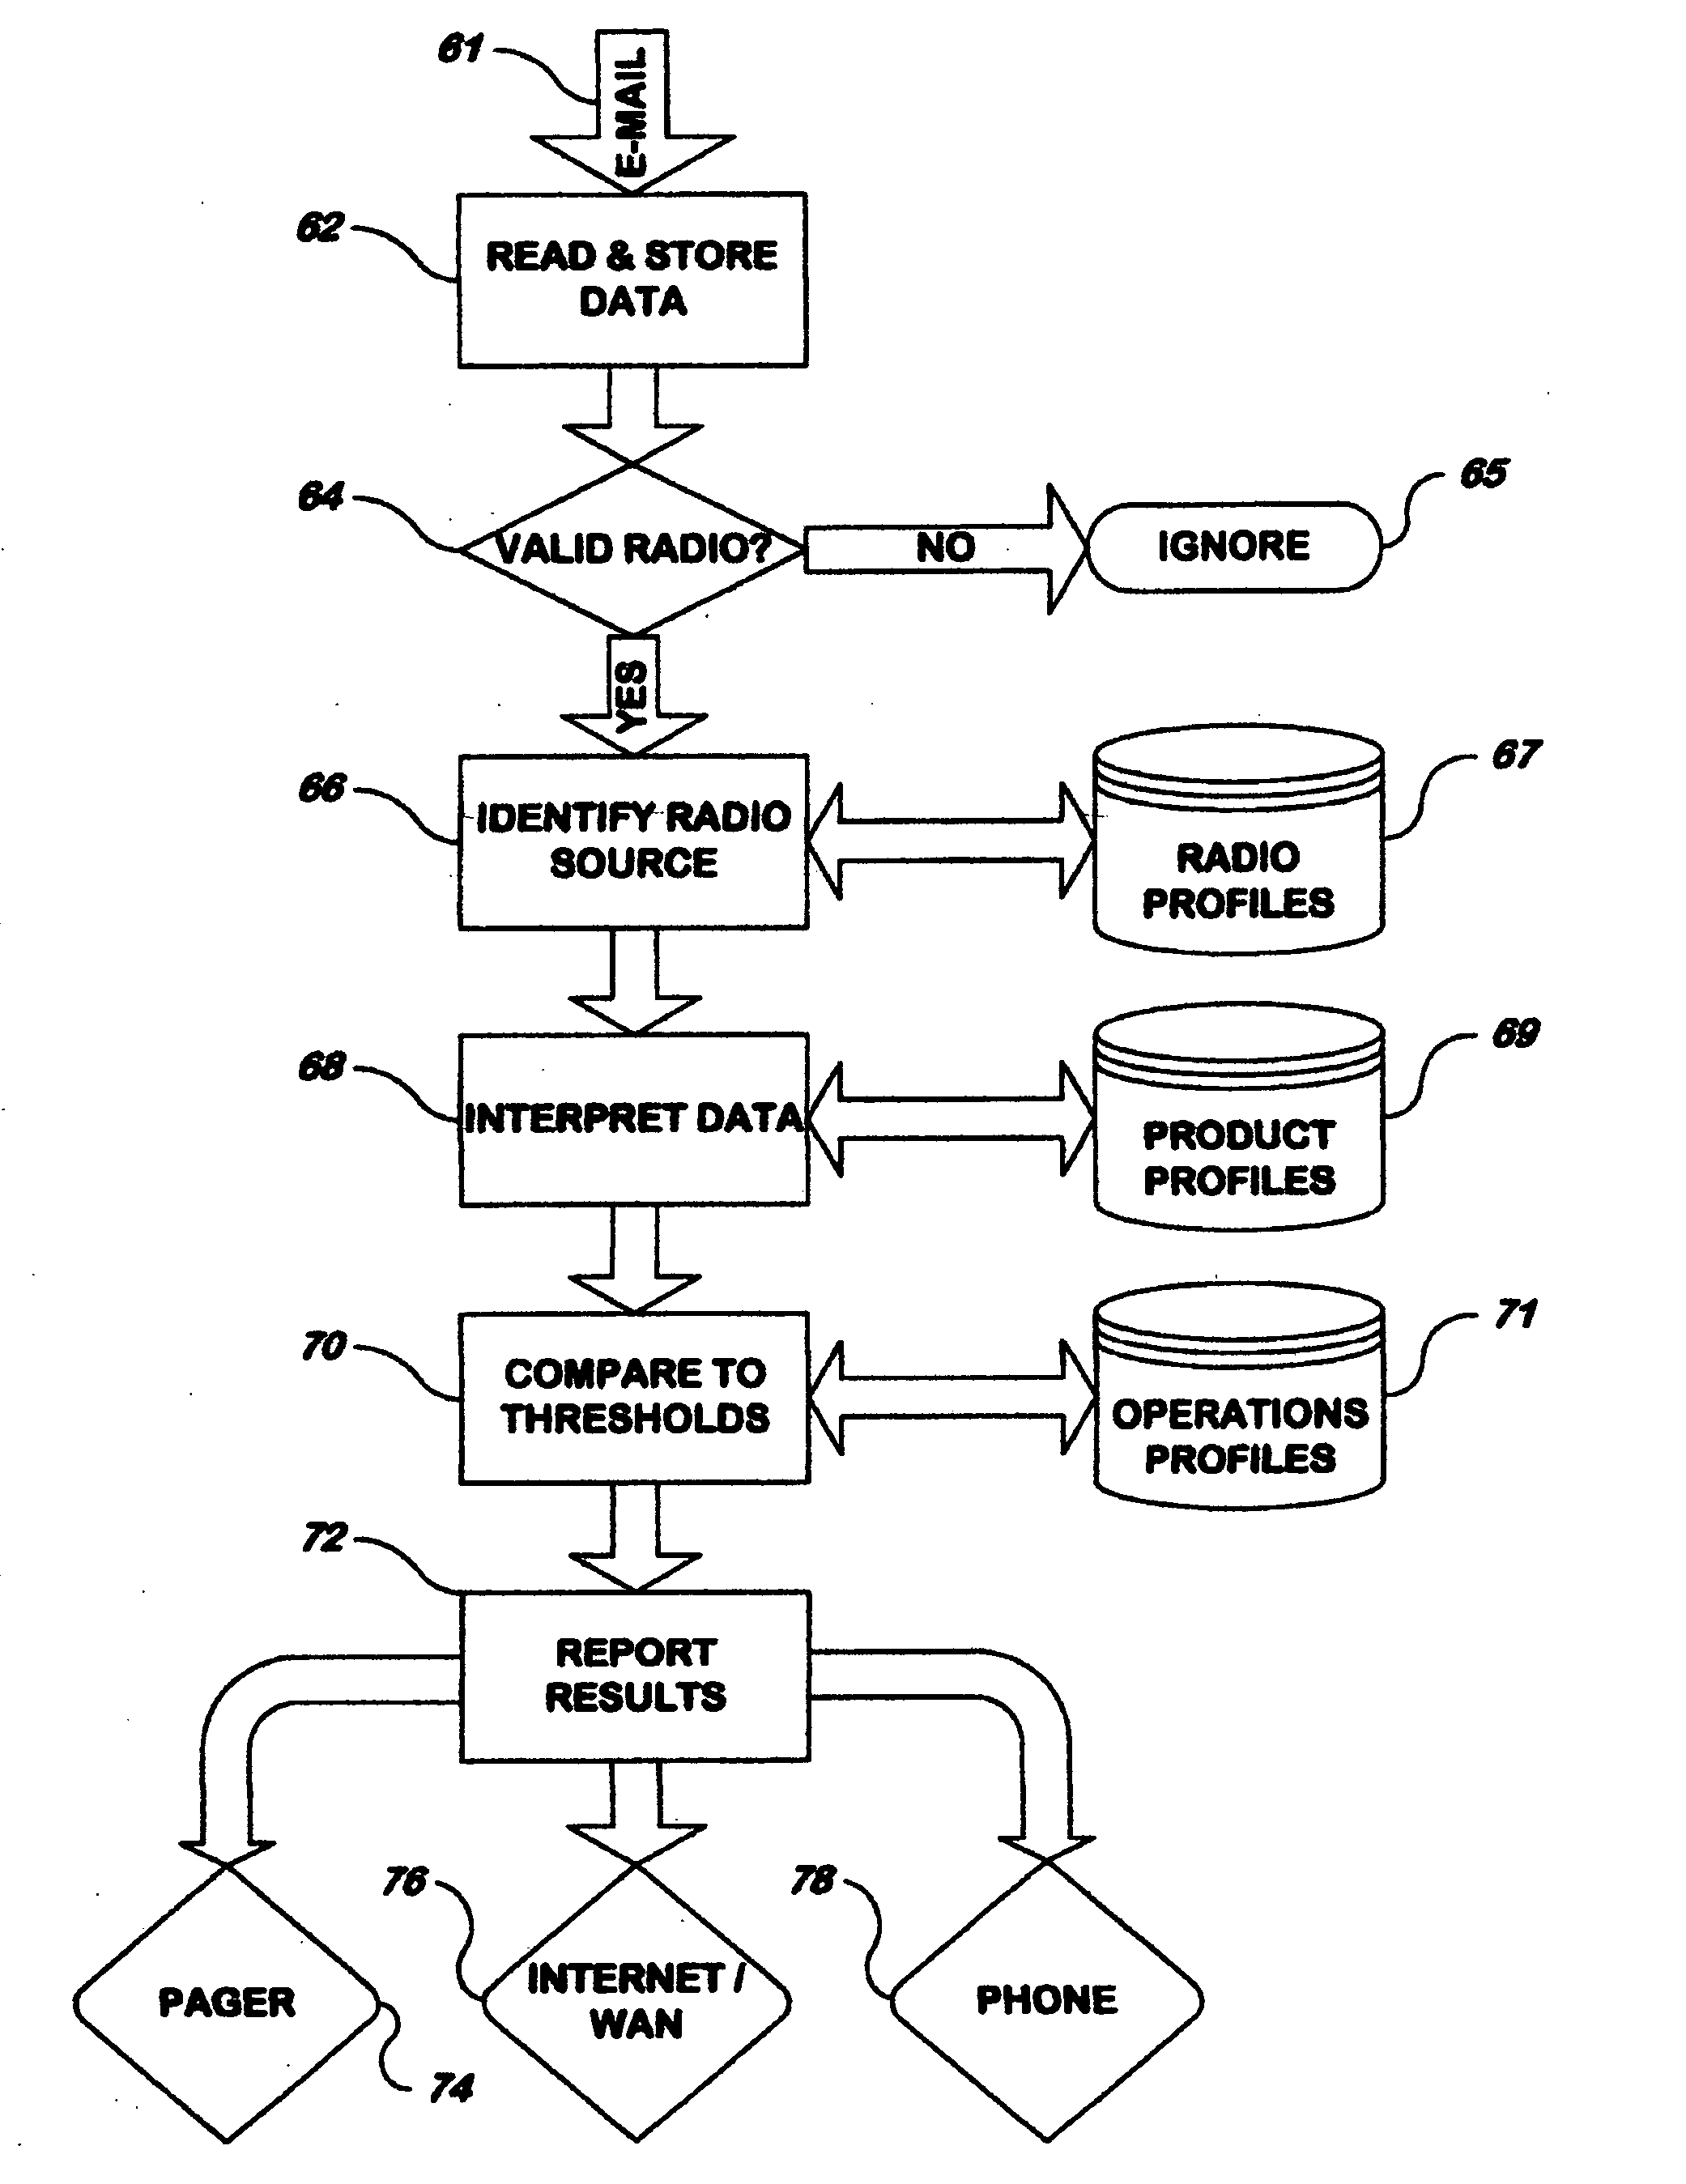 System and method for sensing and analyzing inventory levels and consumer buying habits